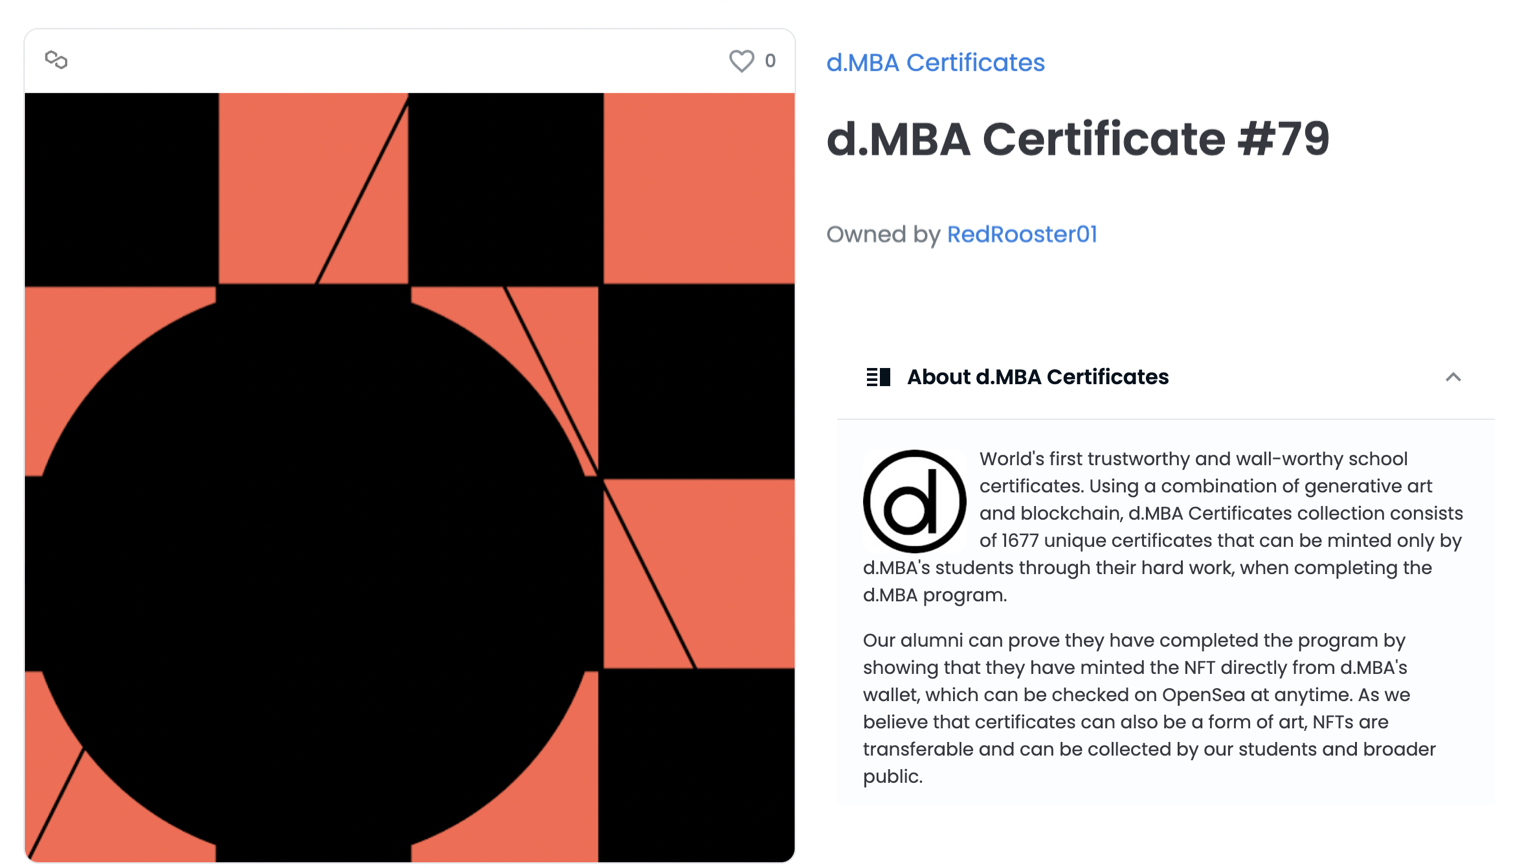 https://d.mba/blog/school-certificates-for-the-digital-age